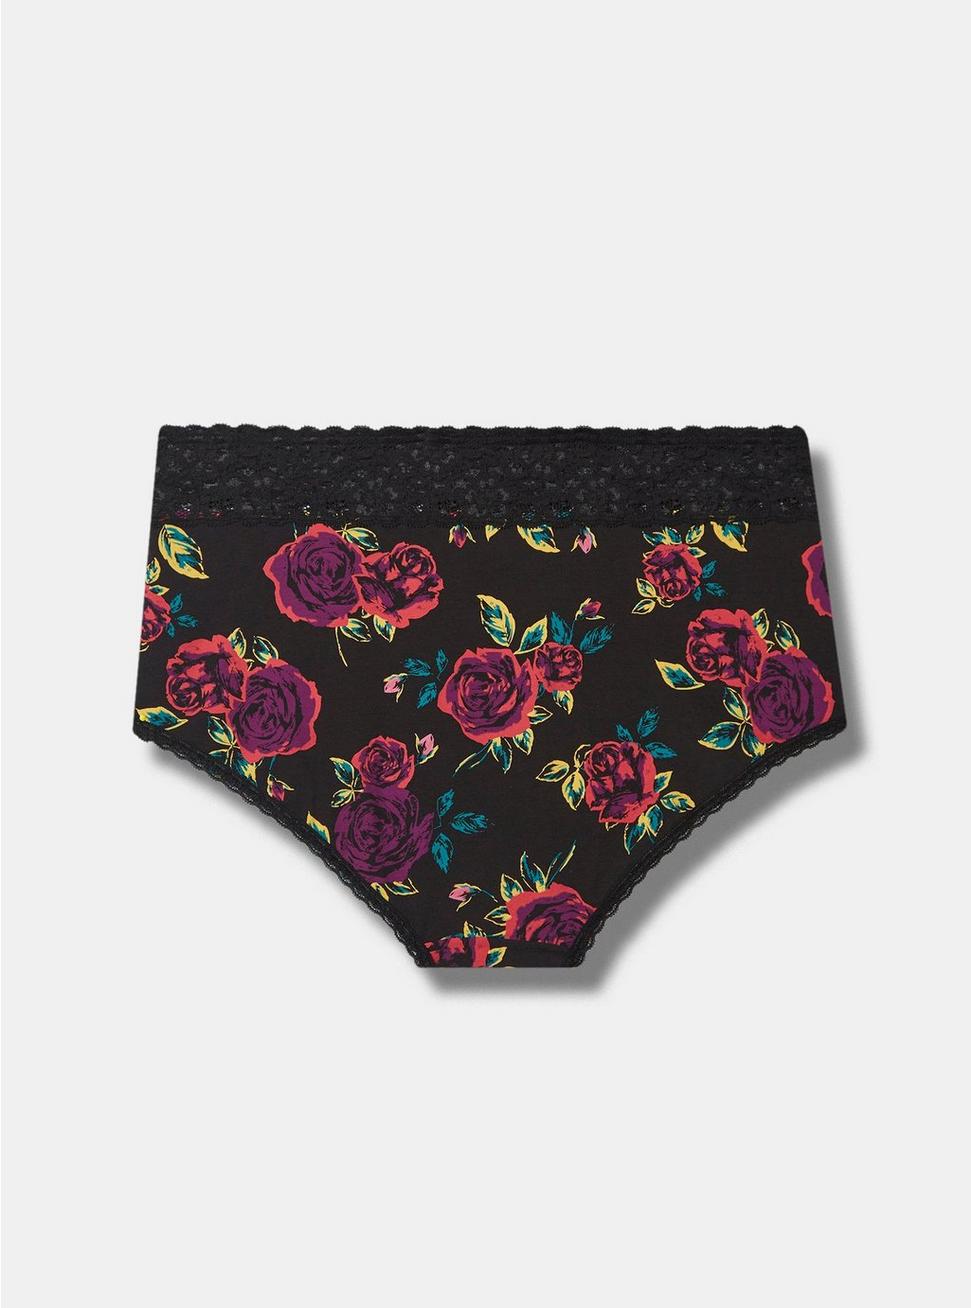 Cotton Mid-Rise Brief Lace Trim Panty, BRUSHED ROSES FLORAL BLACK, alternate